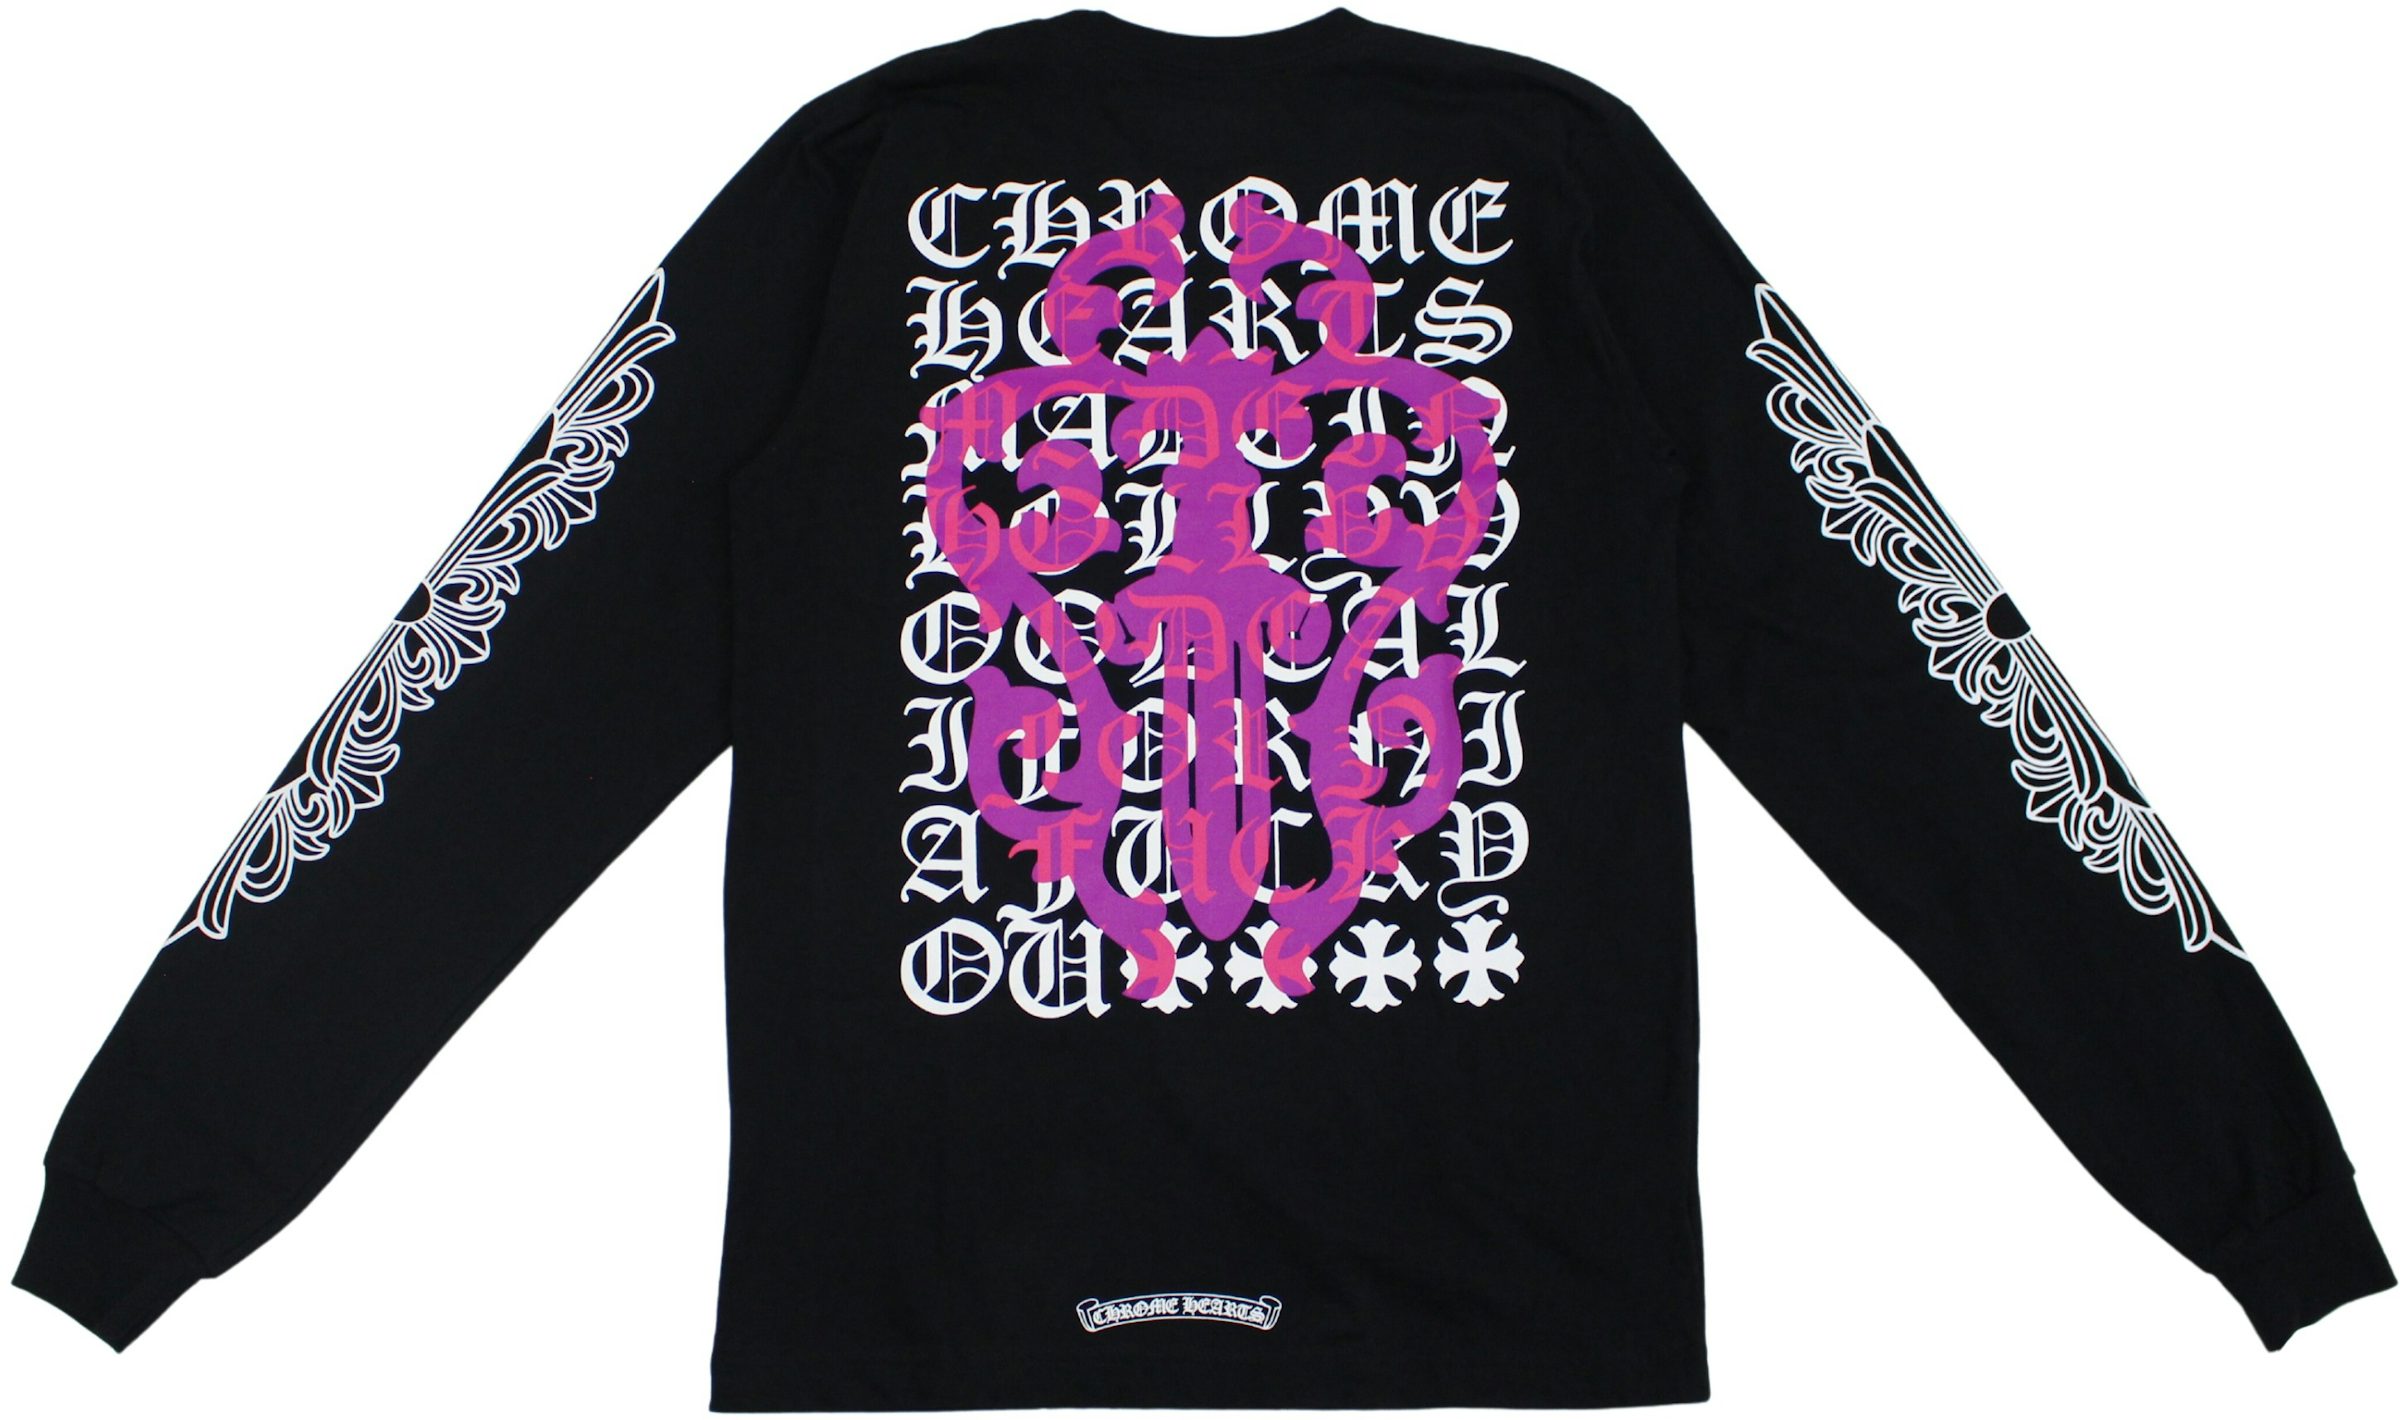 Chrome Hearts Clothing: Price, History and Ways to Buy